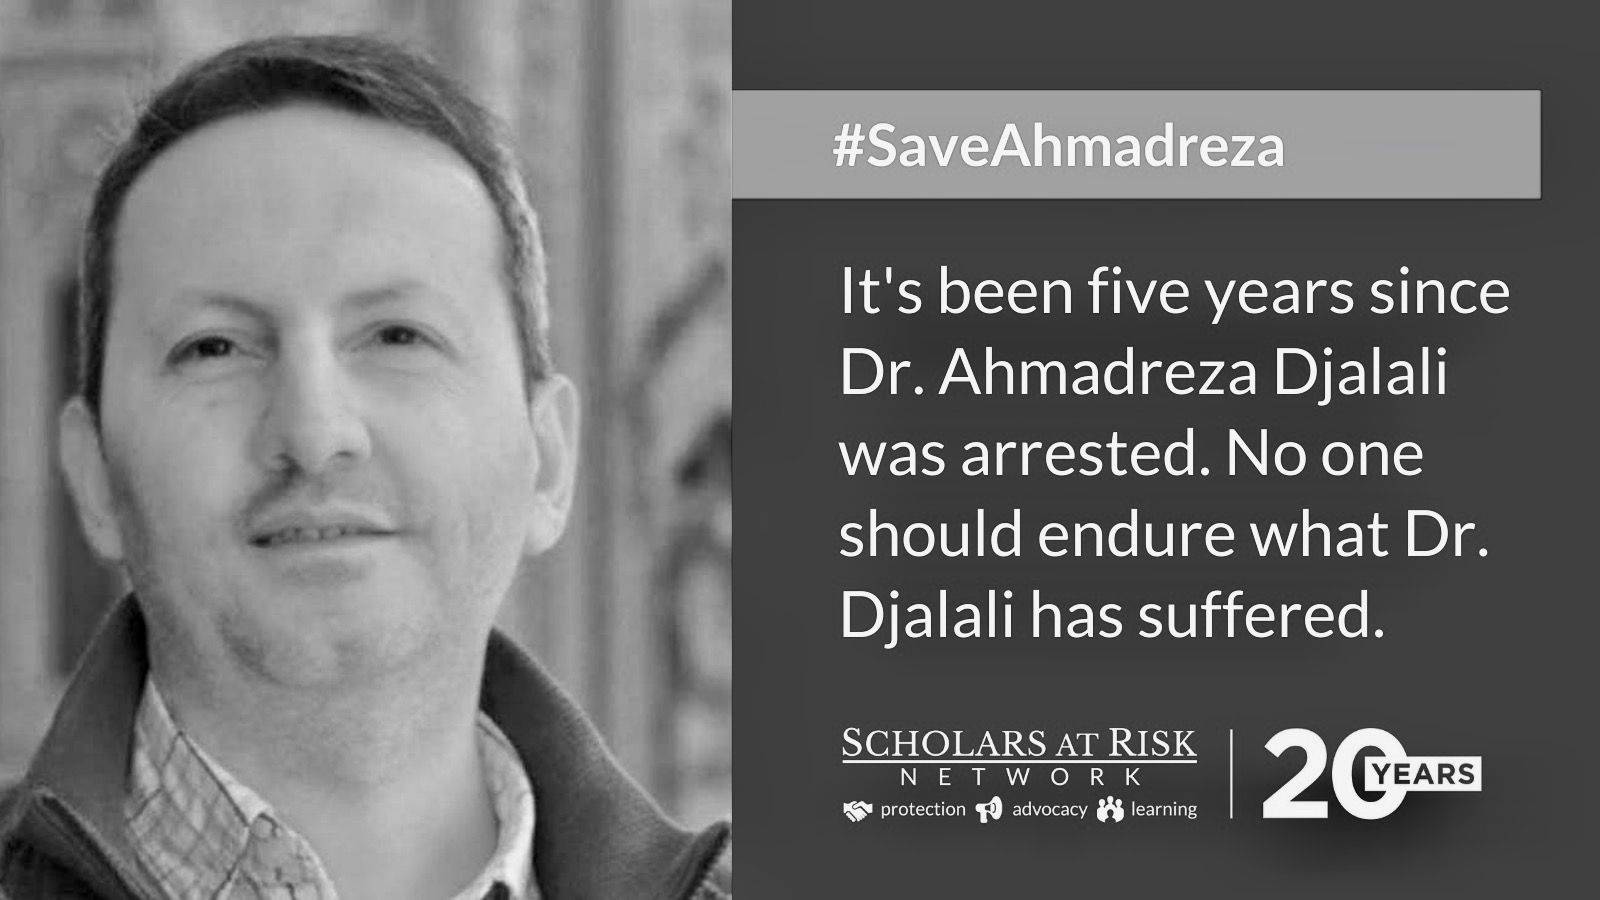 Call for support for the release of Dr. Ahmadreza Djalali